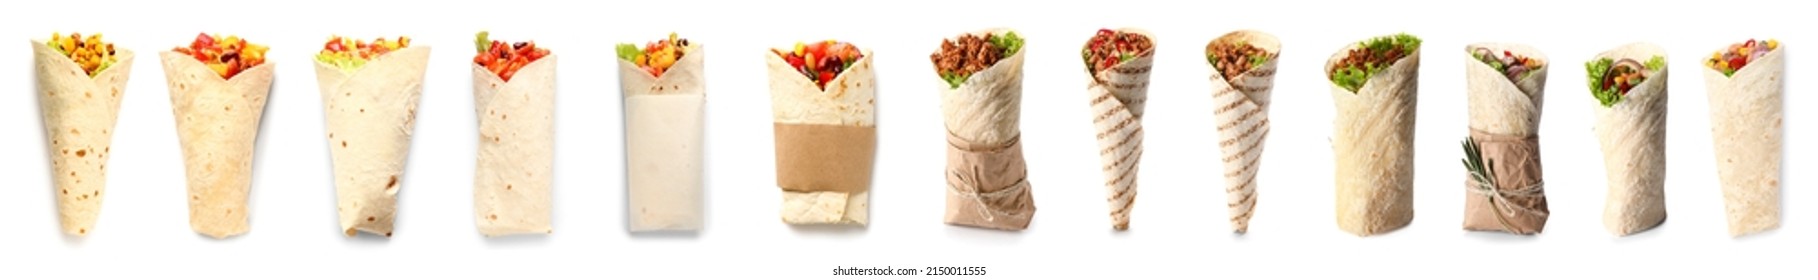 Set of tasty Mexican burritos on white background - Shutterstock ID 2150011555